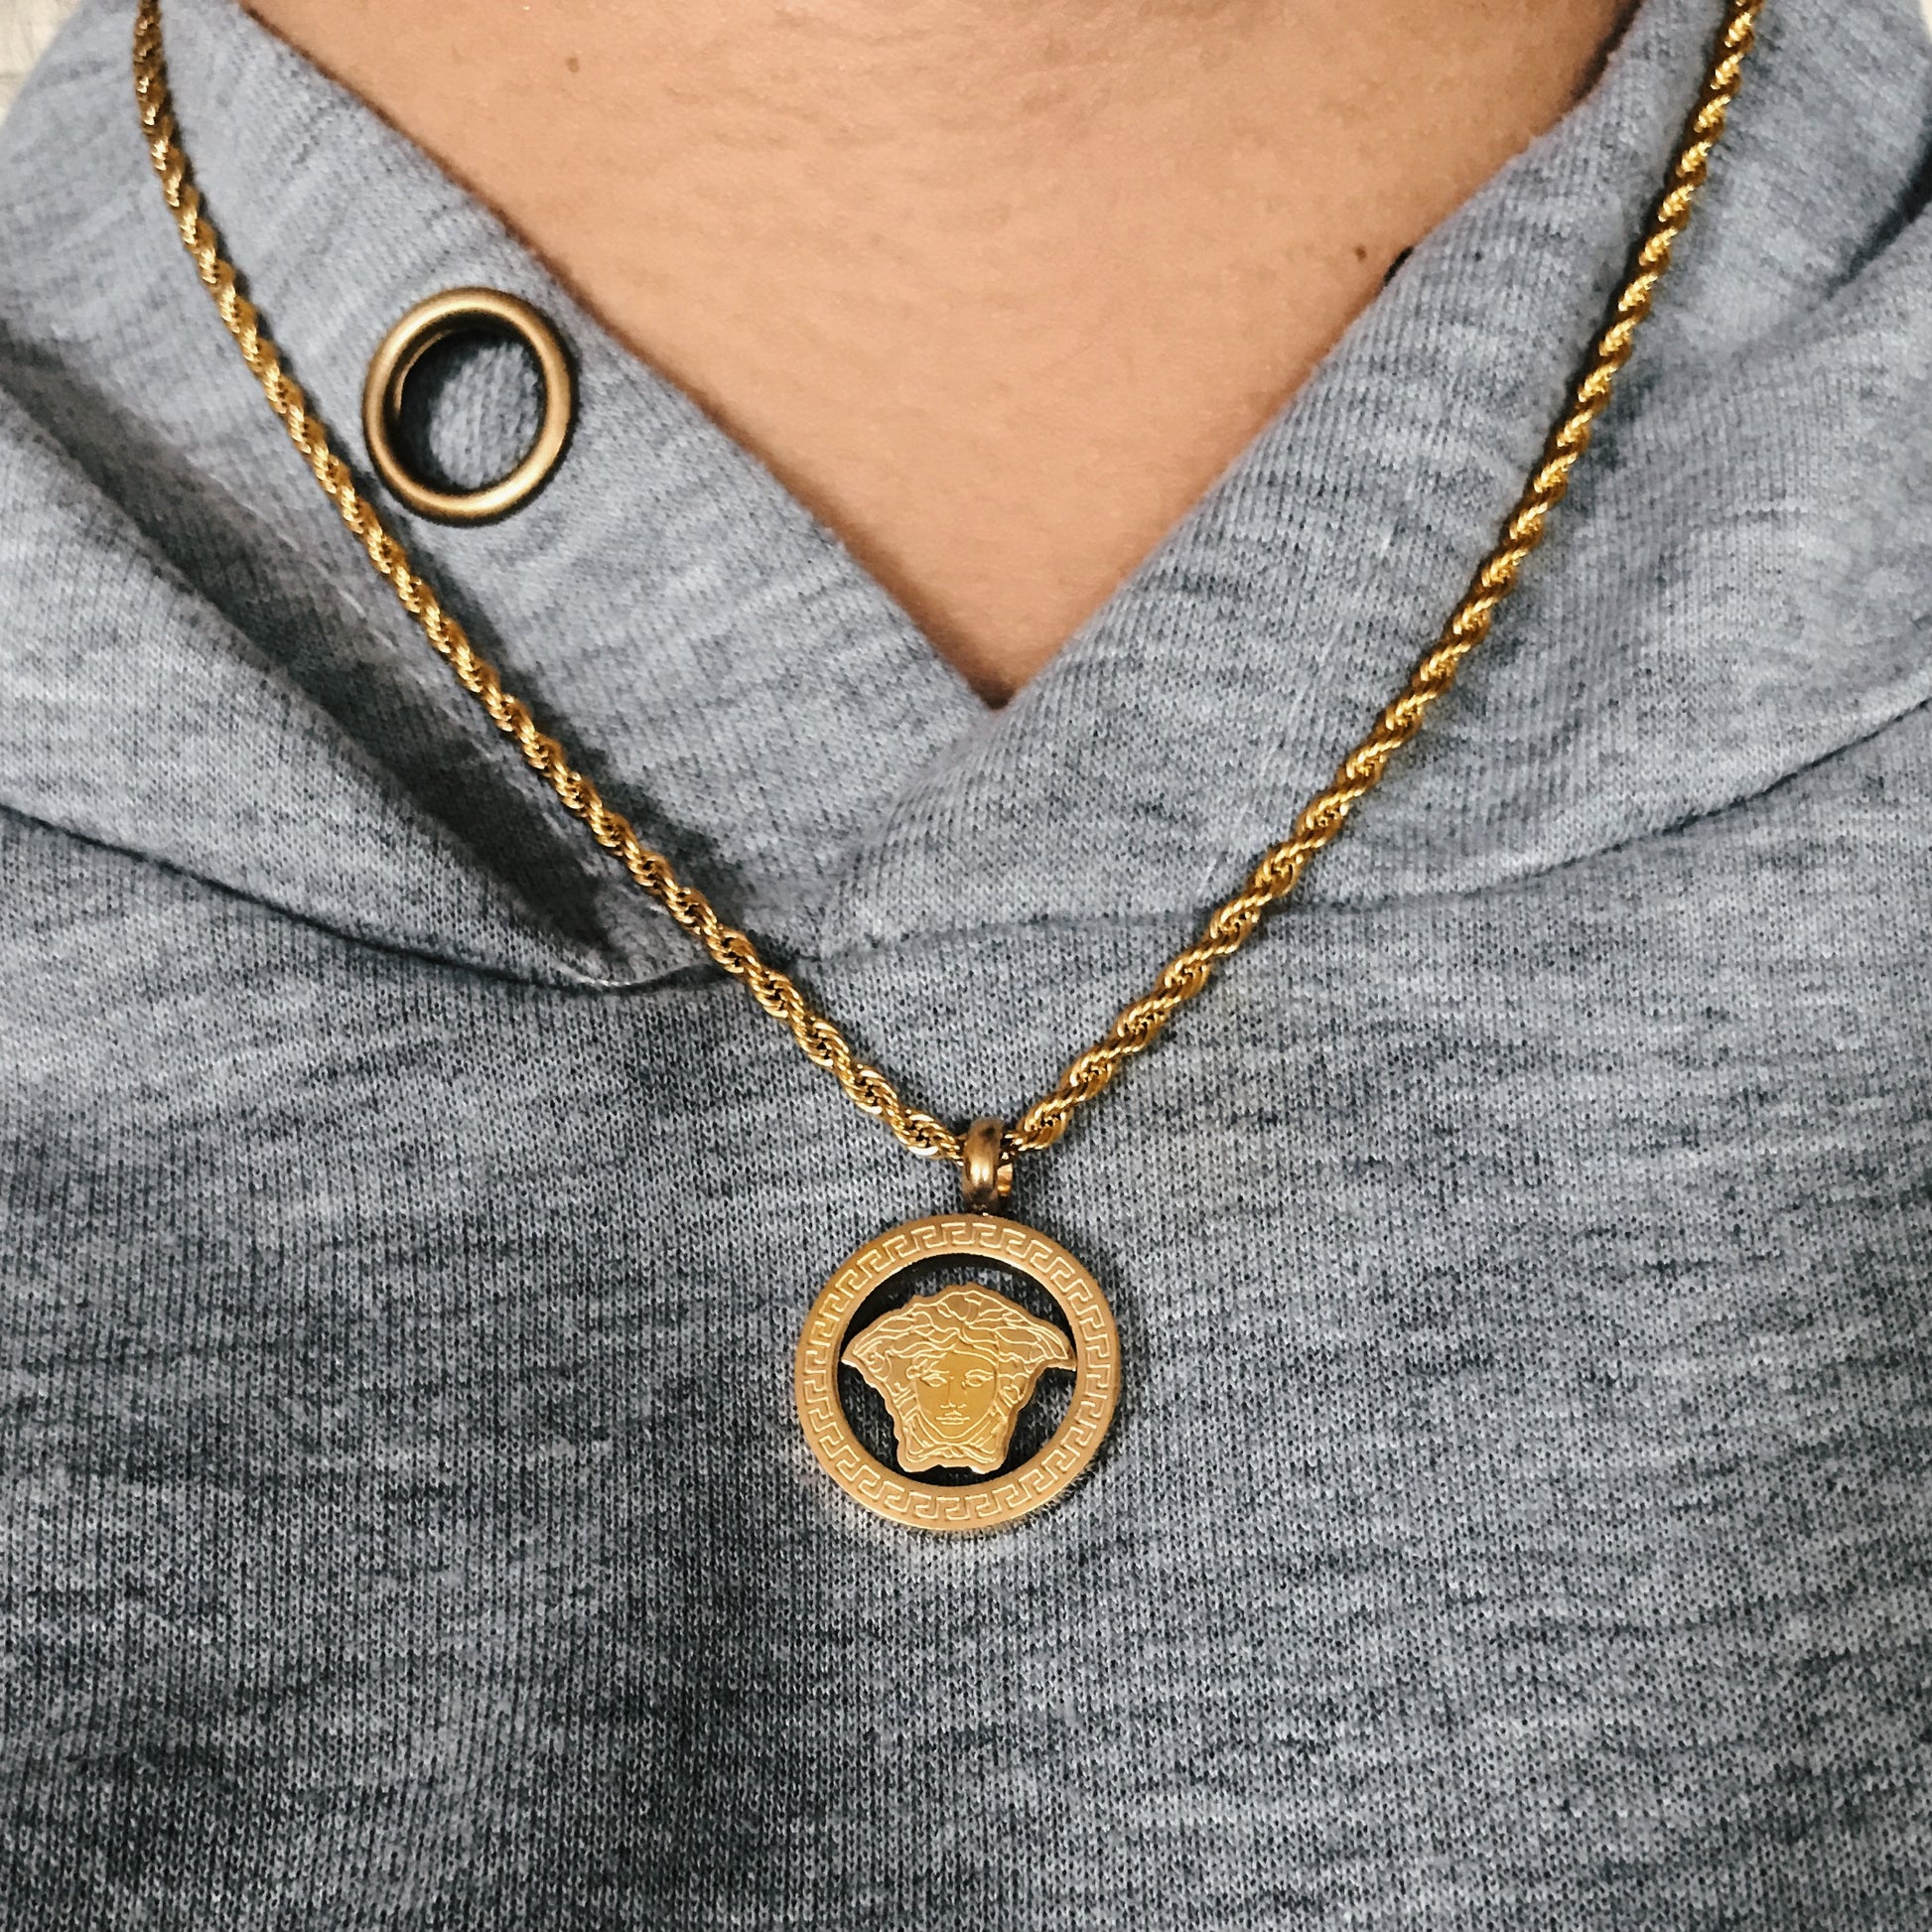 Micro Medusa Medallion - Necklace - Cold Gold Mens Gold Urban Contemporary Hiphop Jewelry